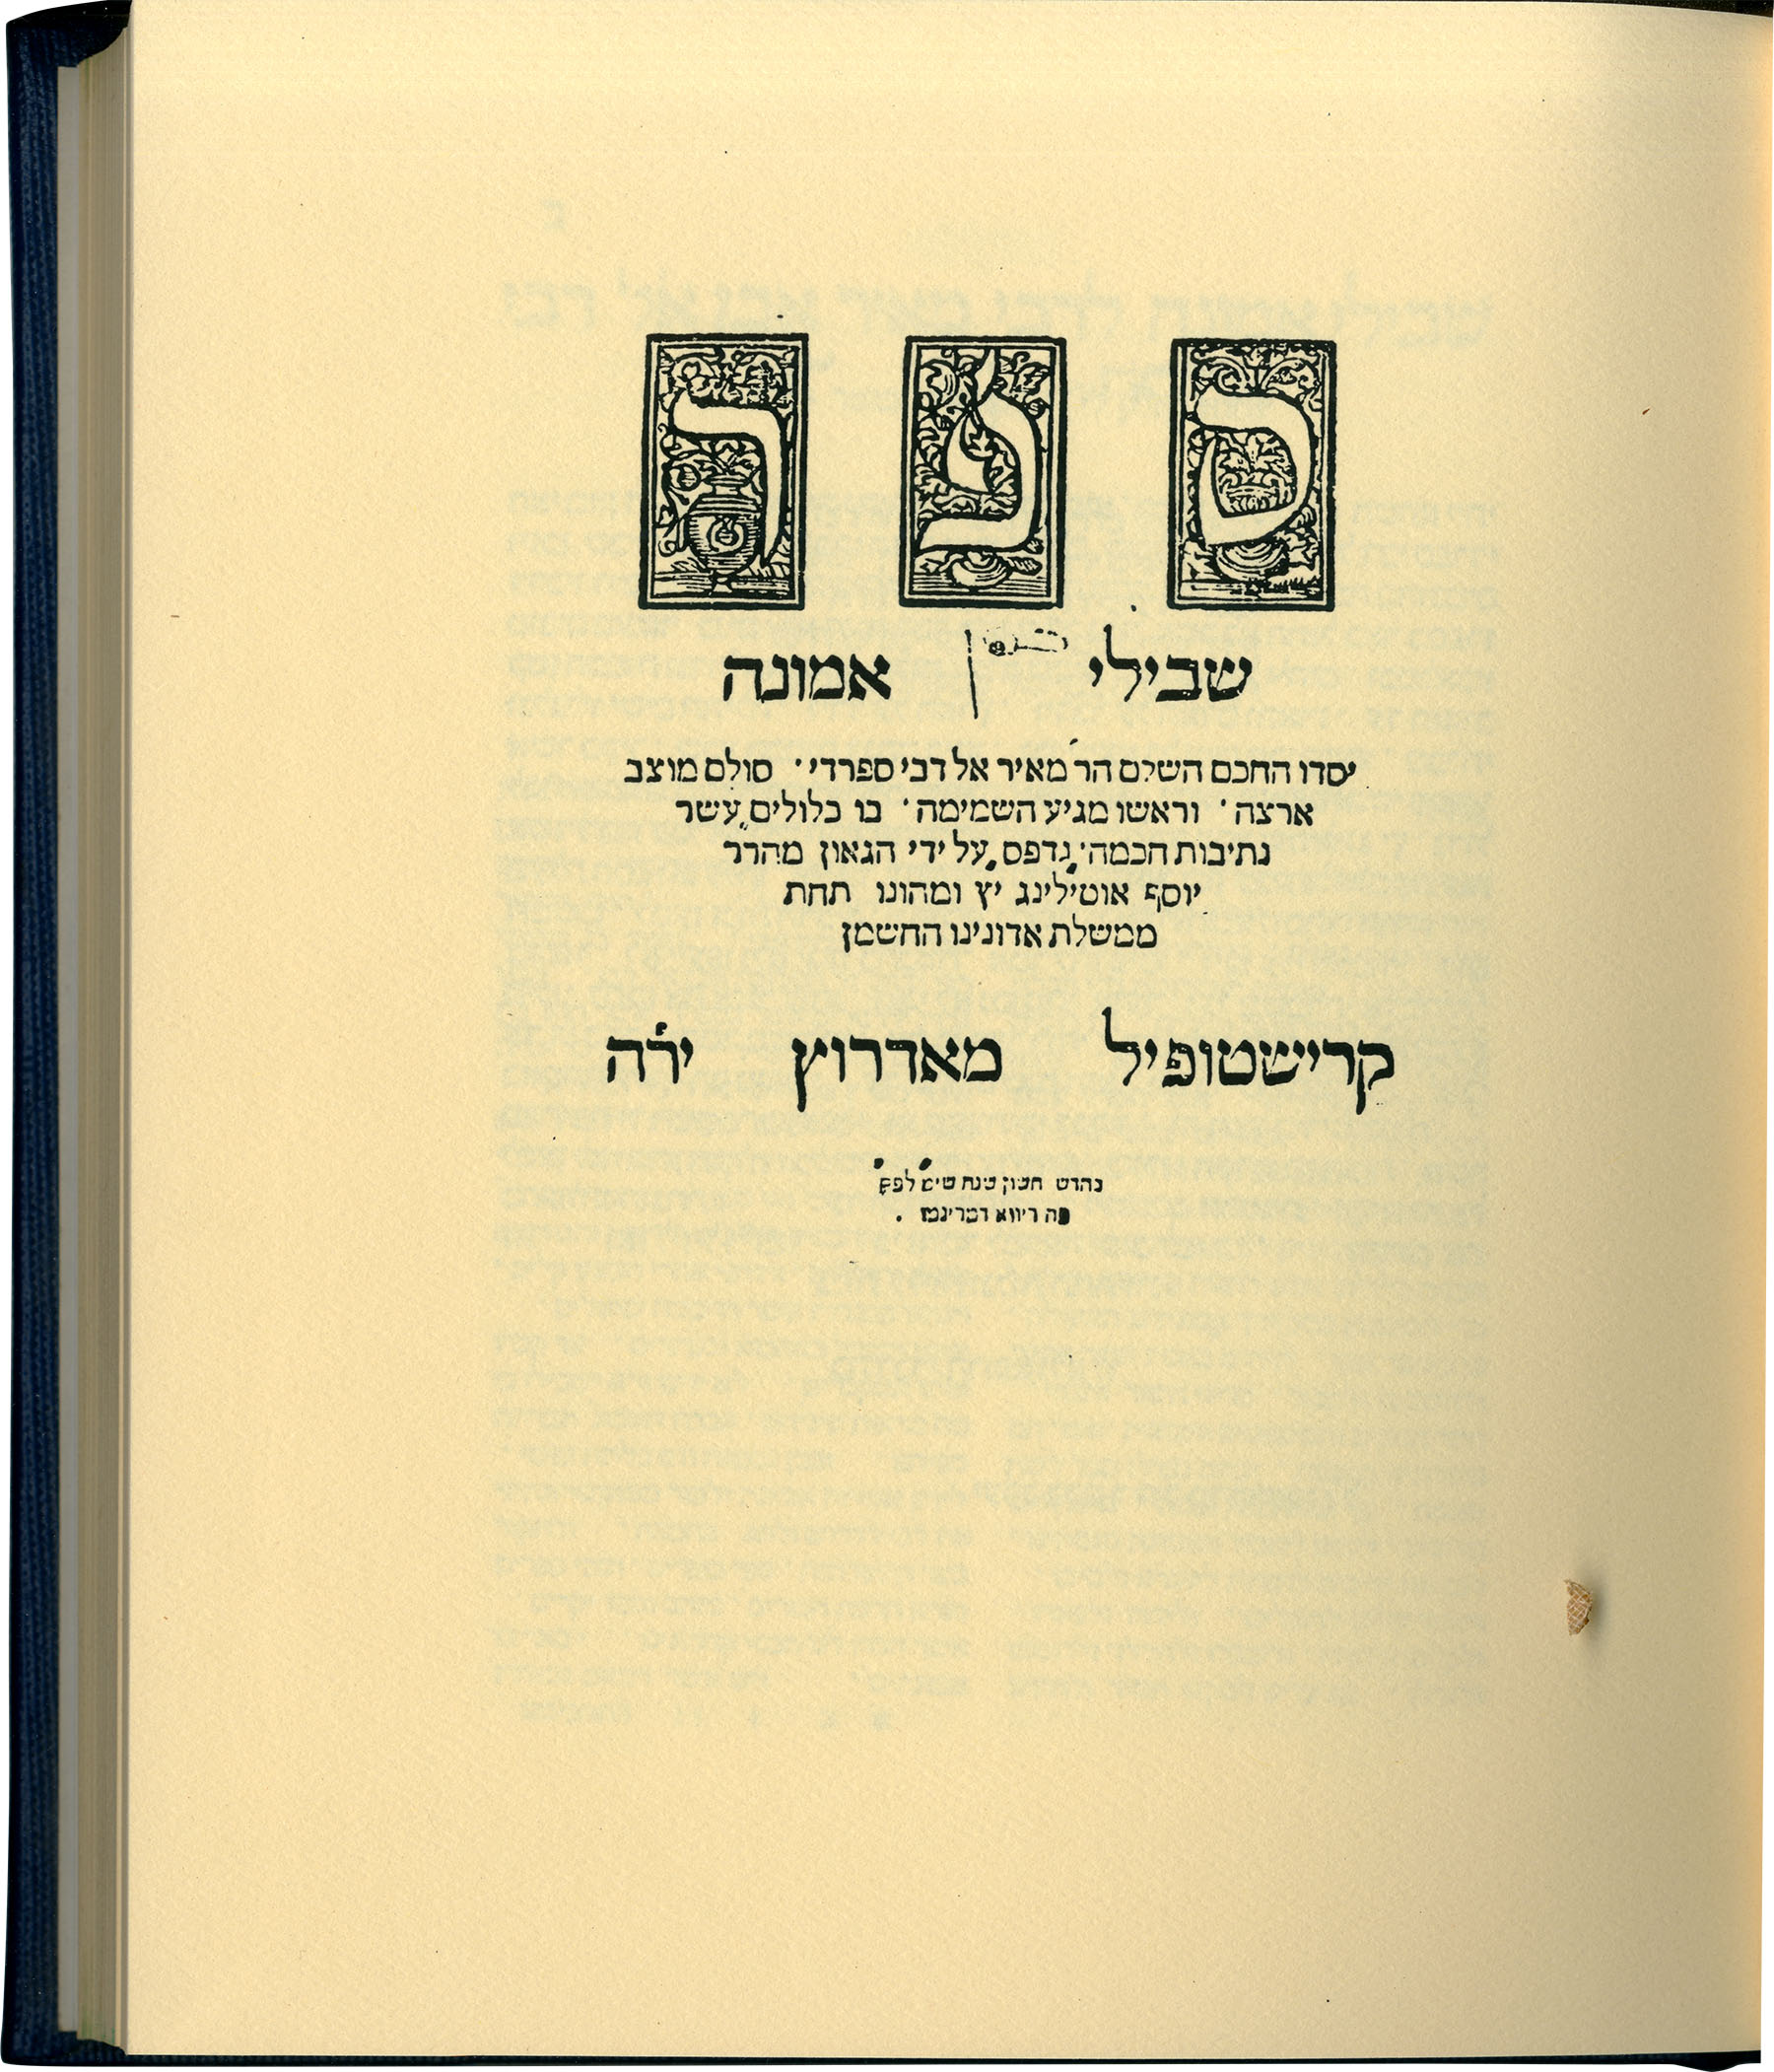 Title page of the facsimile edition